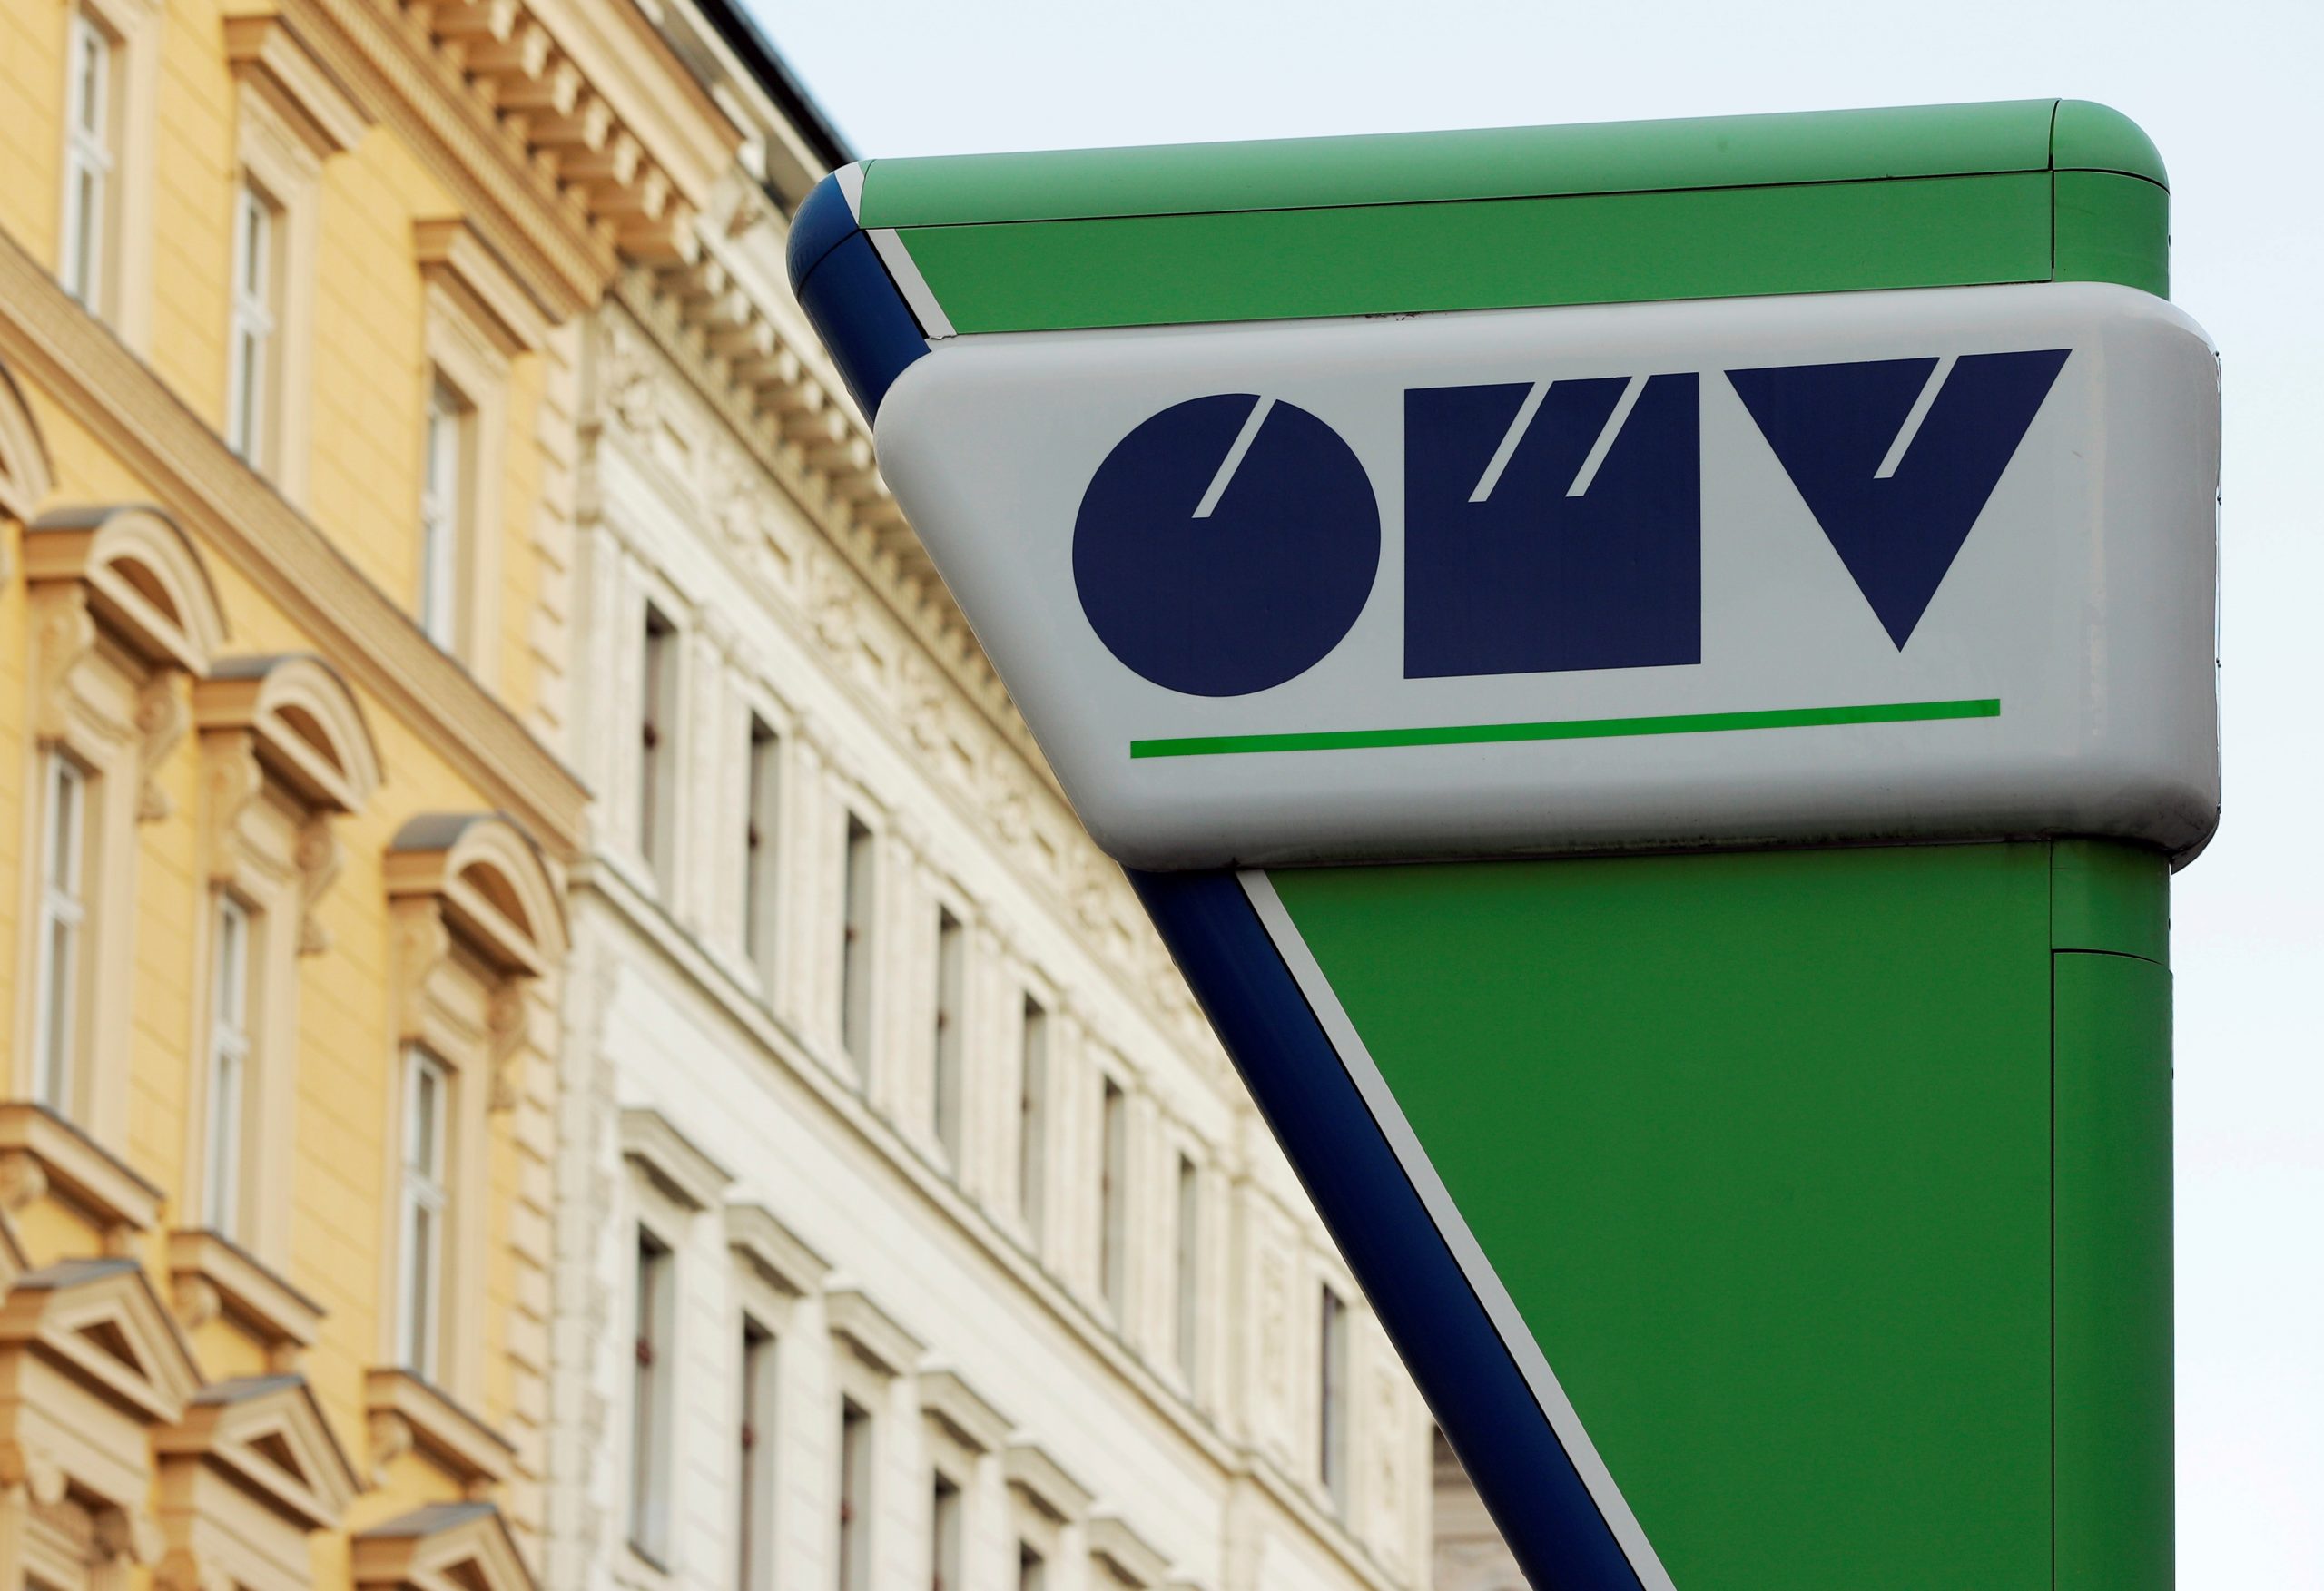 FILE PHOTO: Logo of Austrian oil and gas group OMV is seen at a gas station in Vienna FILE PHOTO: The logo of Austrian oil and gas group OMV is seen at a gas station in Vienna, Austria, October 30, 2018. Picture taken October 30, 2018. REUTERS/Heinz-Peter Bader/File Photo HEINZ-PETER BADER